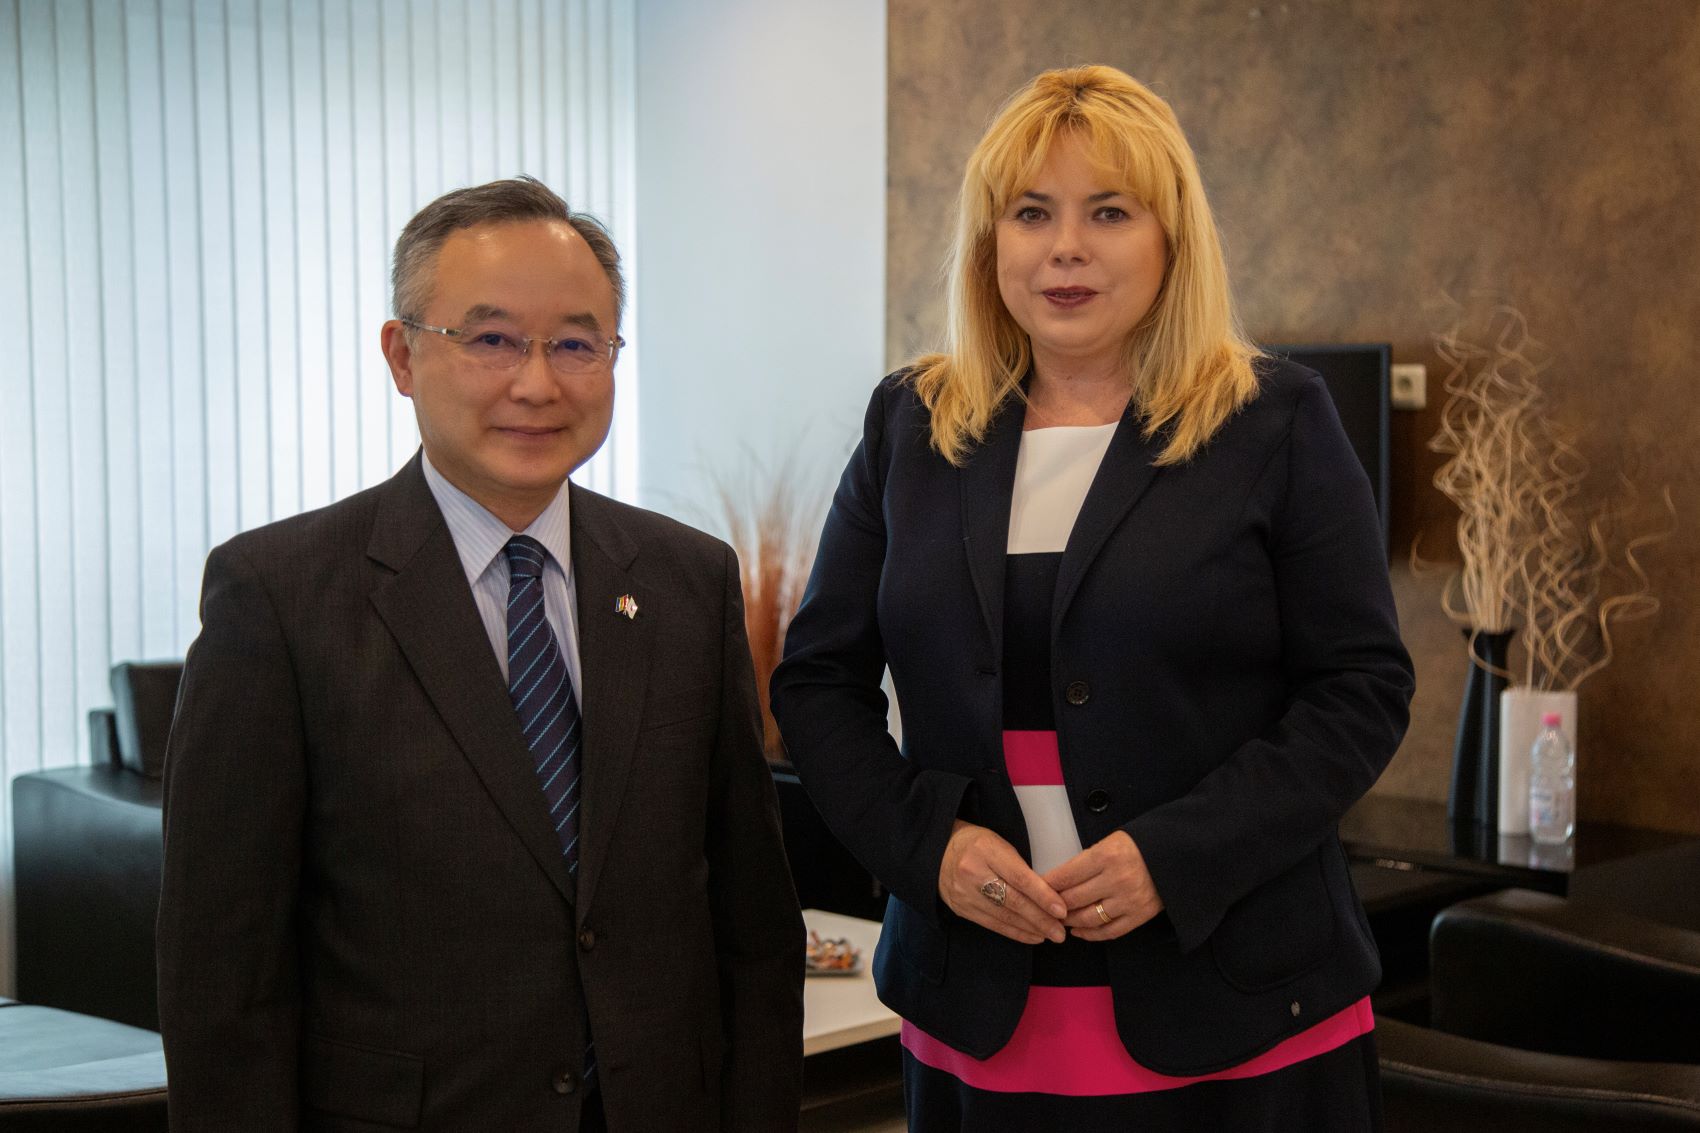 NBM Governor Anca Dragu met with the Japanese Ambassador to Moldova: what was on the agenda?